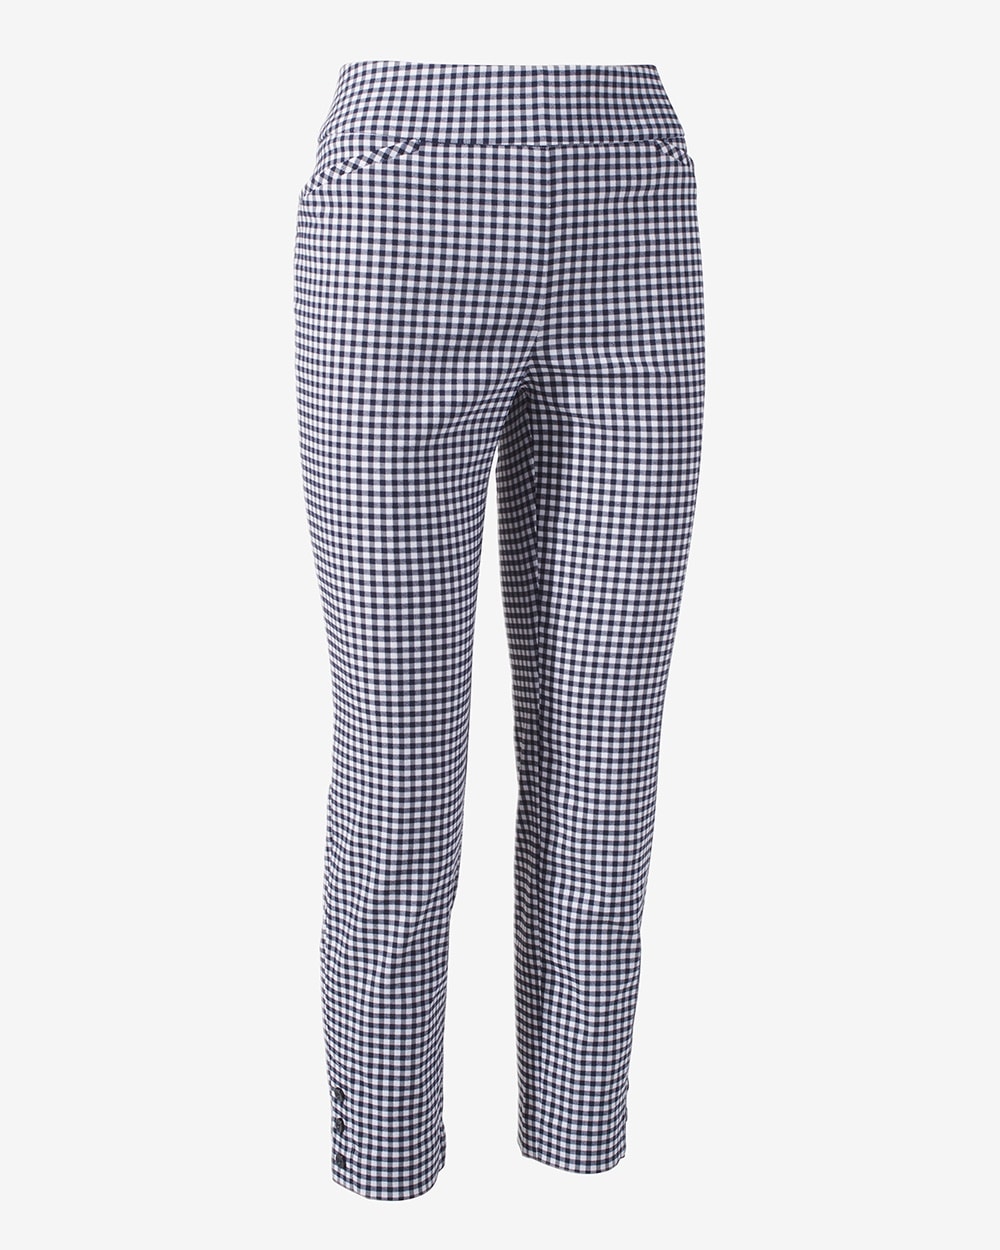 Perfect Stretch Classic Gingham Josie Slim Ankle Pants